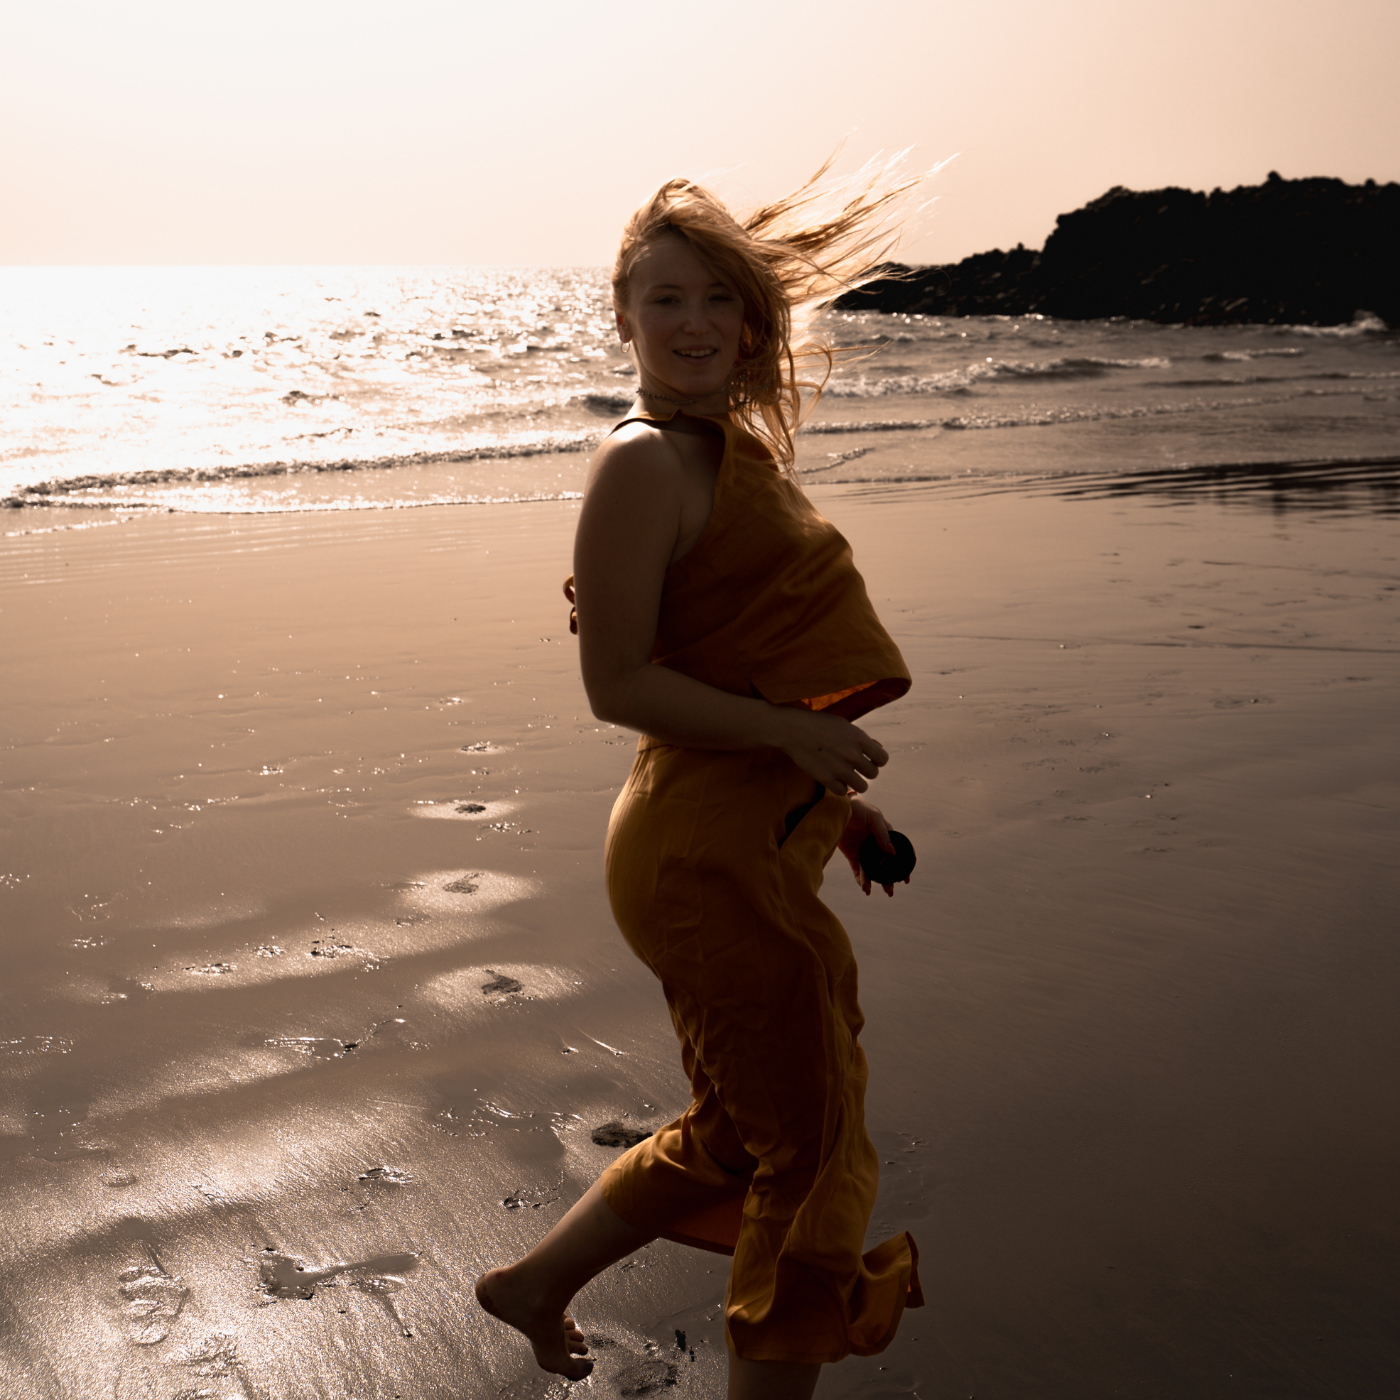 Woman on the beach in yellow clothes and dress. Circular fashion for travellers with versatile and interchangeable clothing to explore.